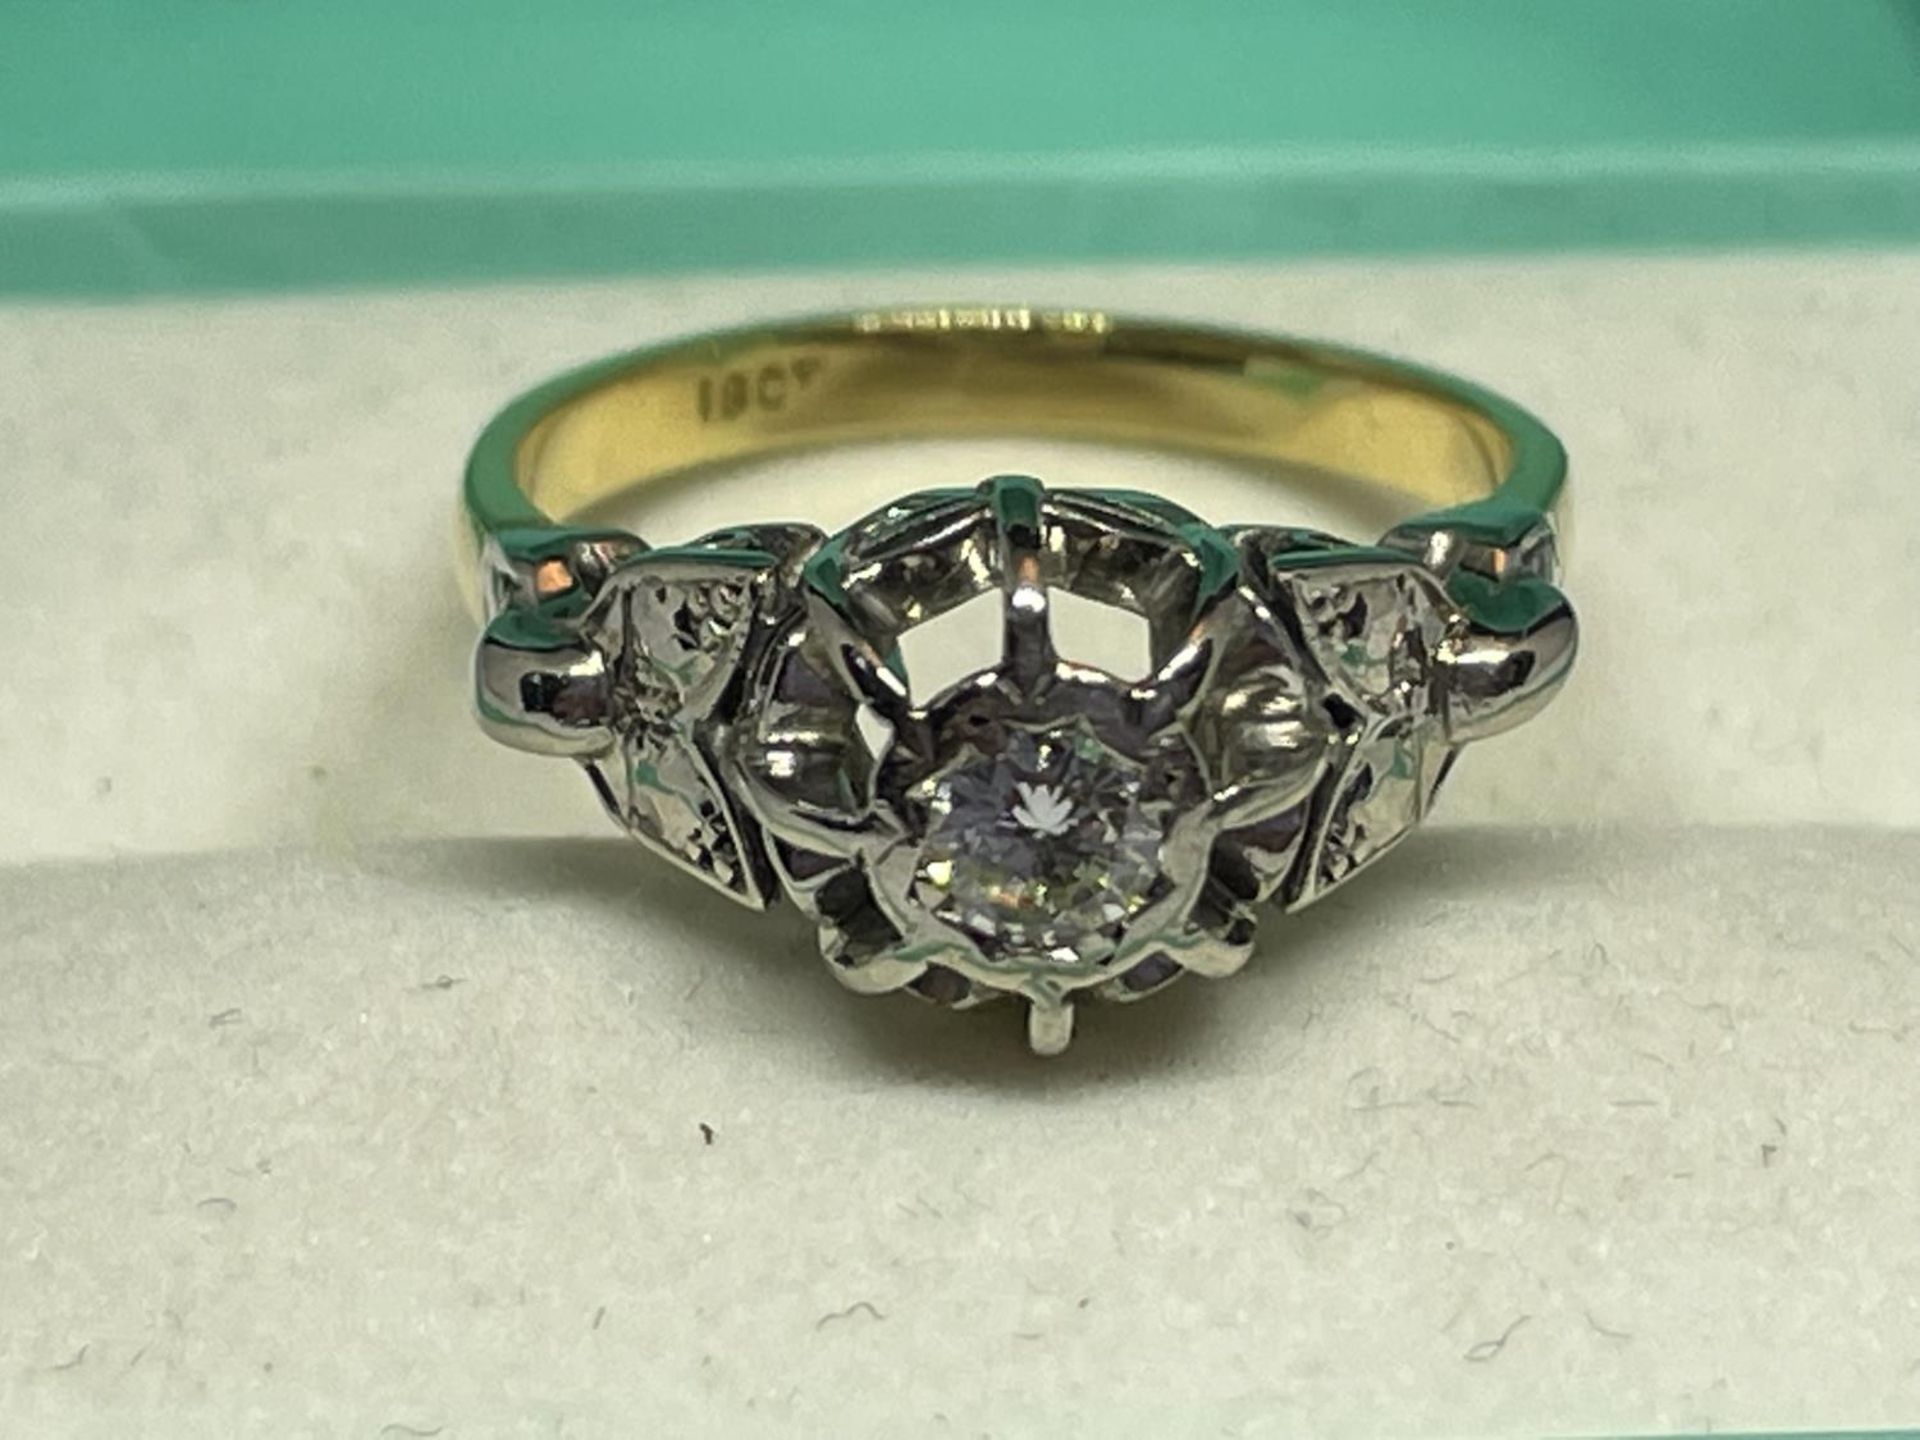 AN 18 CARAT GOLD AND PLATINUM DIAMOND SOLITAIRE RING SIZE M/N IN A PRESENTATION BOX - Image 3 of 4